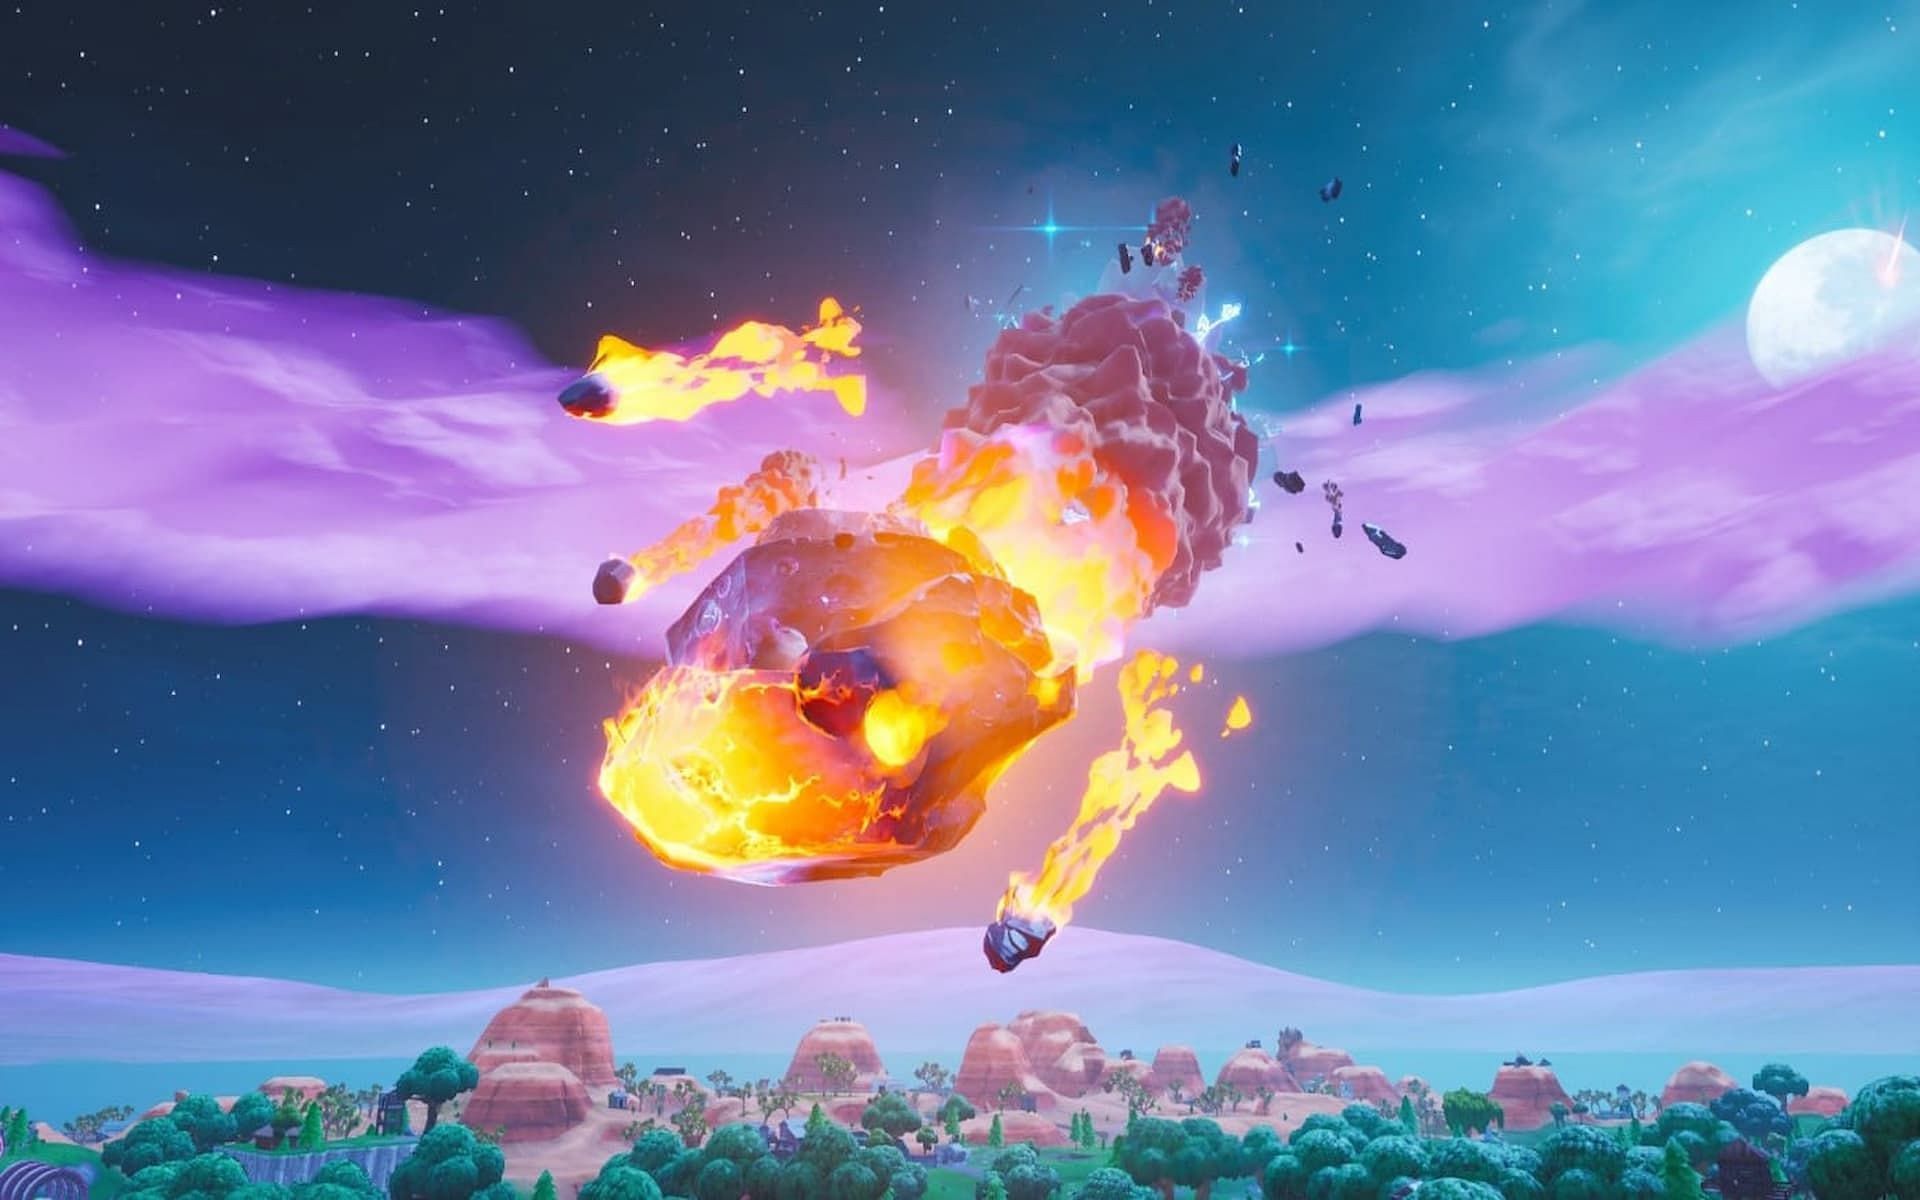 Live events are the bread and butter of Fortnite (Image via Epic Games)